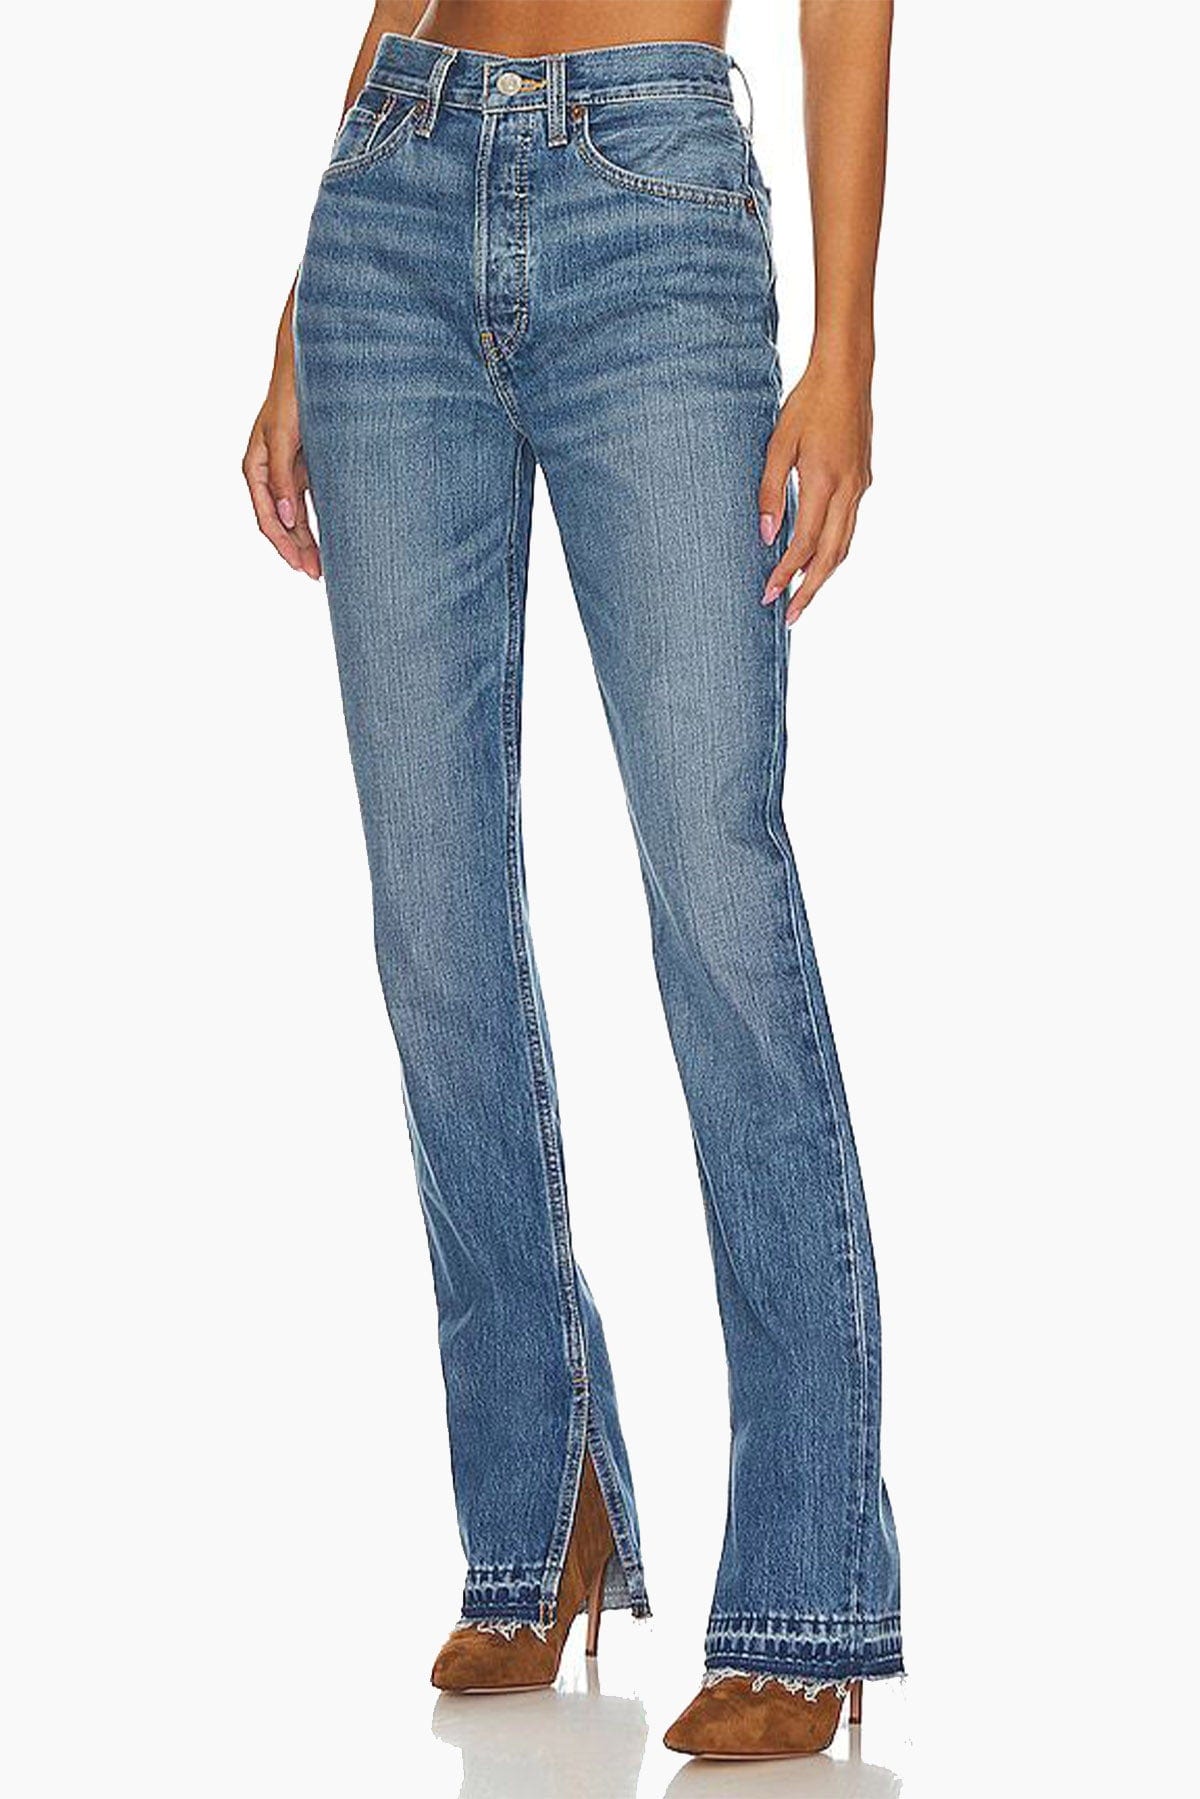 RE/DONE PANTALONE IN DENIM  Jeans Donna Re/Done 70s High Rise Skinny Boot